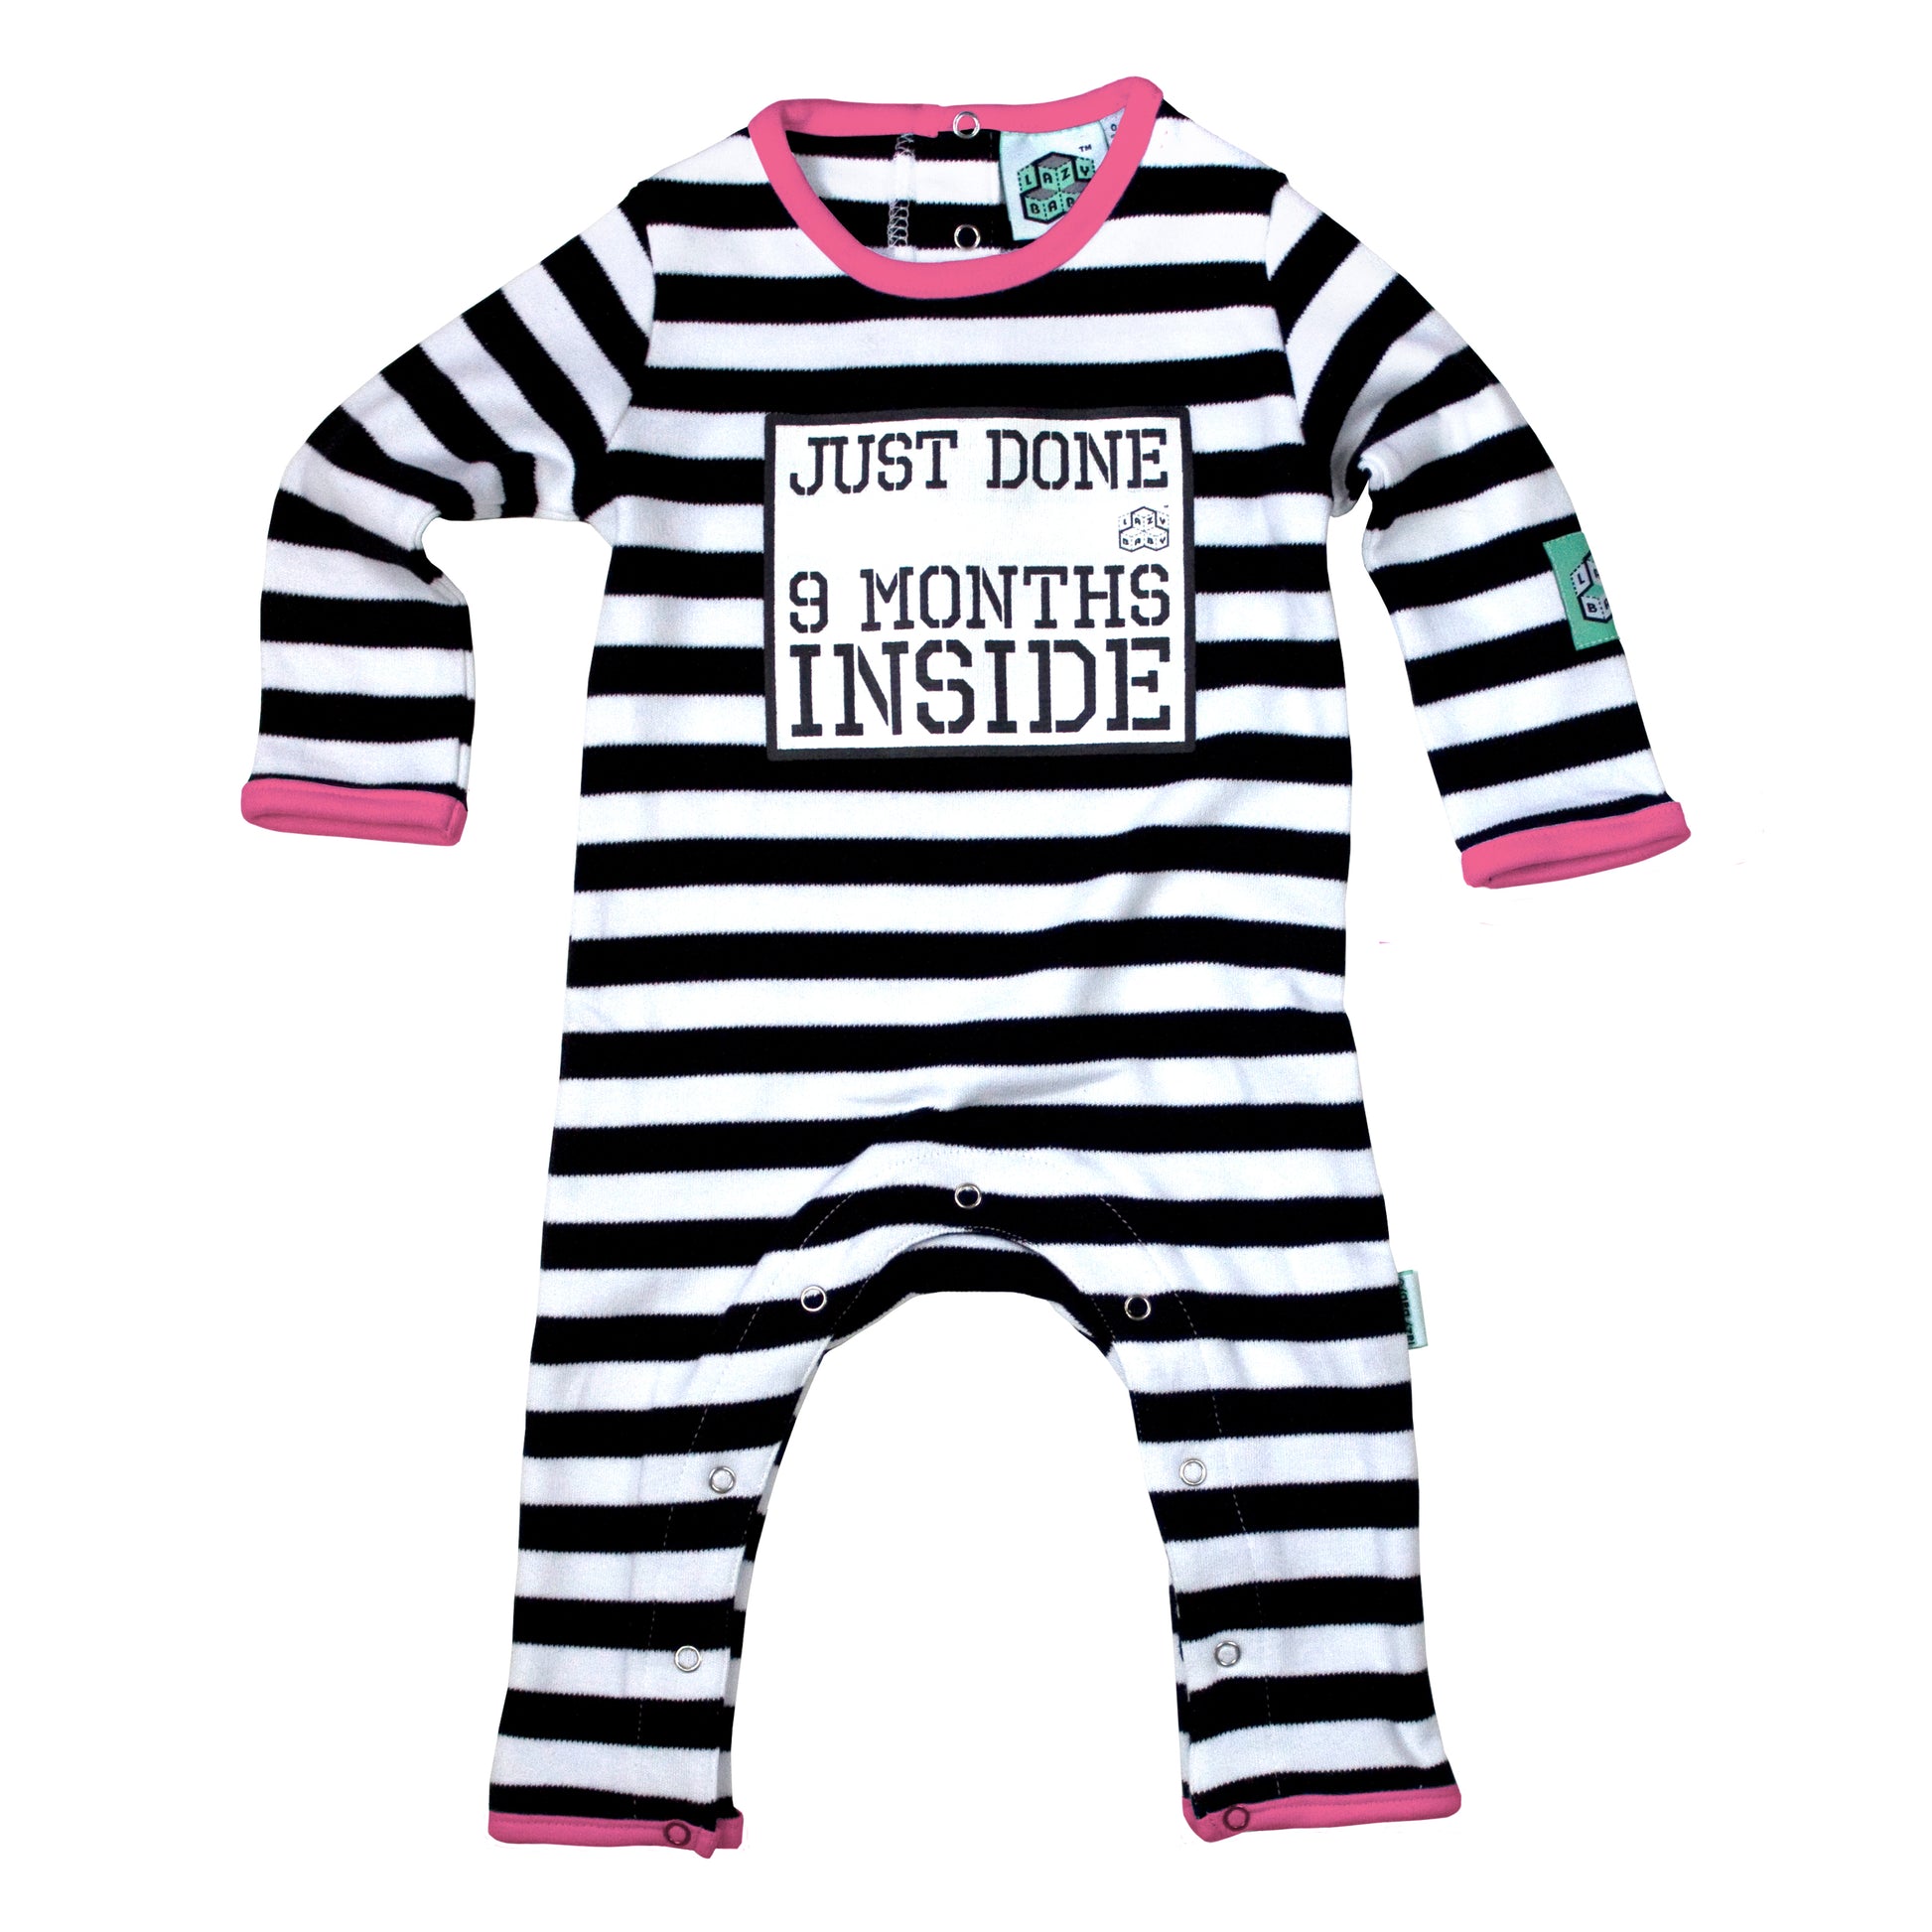 Just Done 9 Months Inside slogan baby grow black white stripes with pink edging